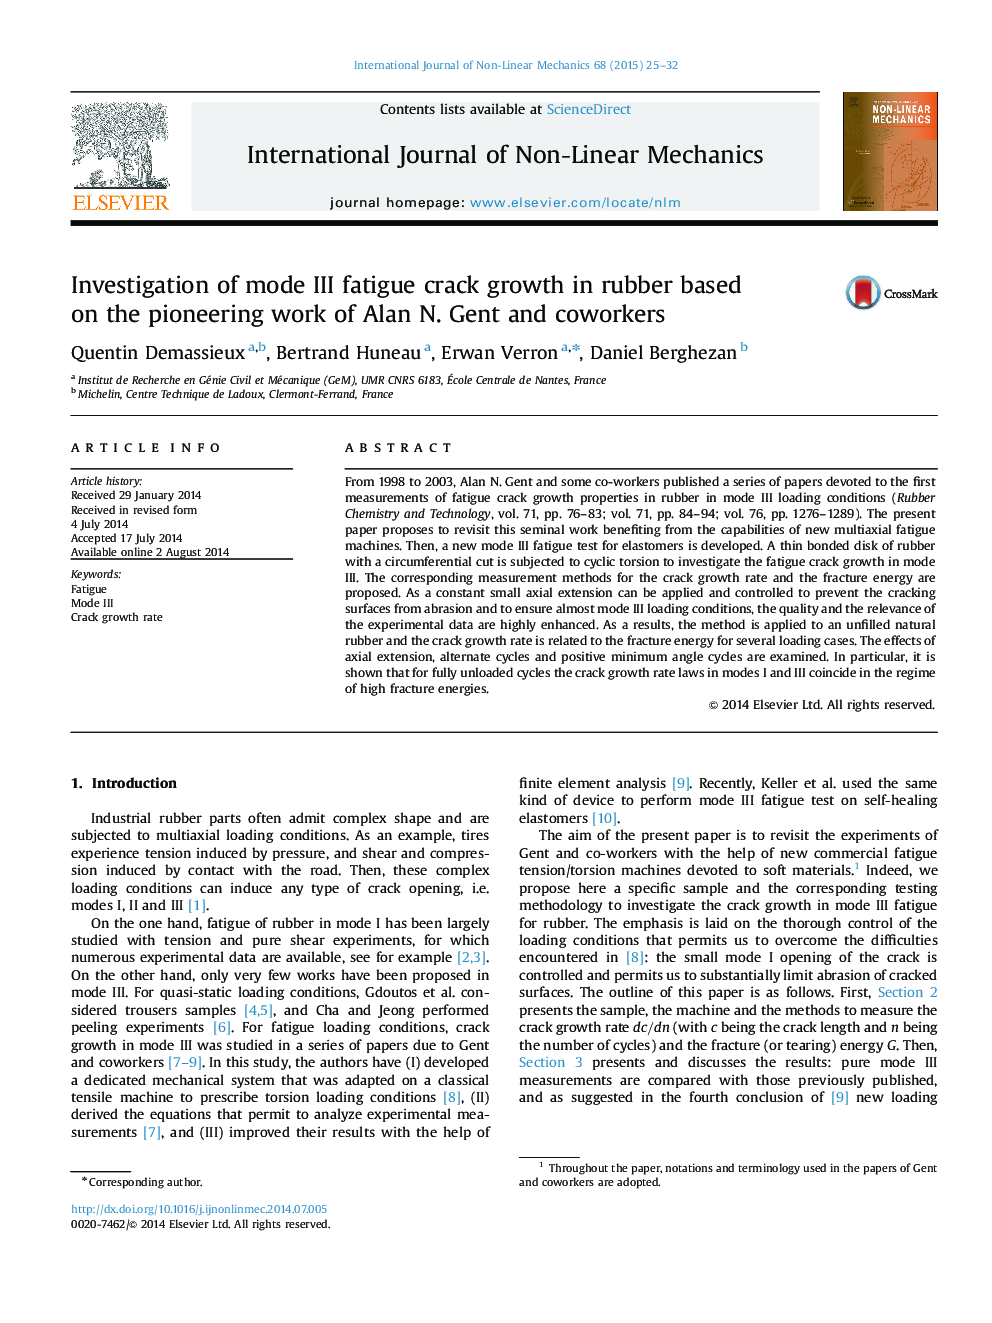 Investigation of mode III fatigue crack growth in rubber based on the pioneering work of Alan N. Gent and coworkers